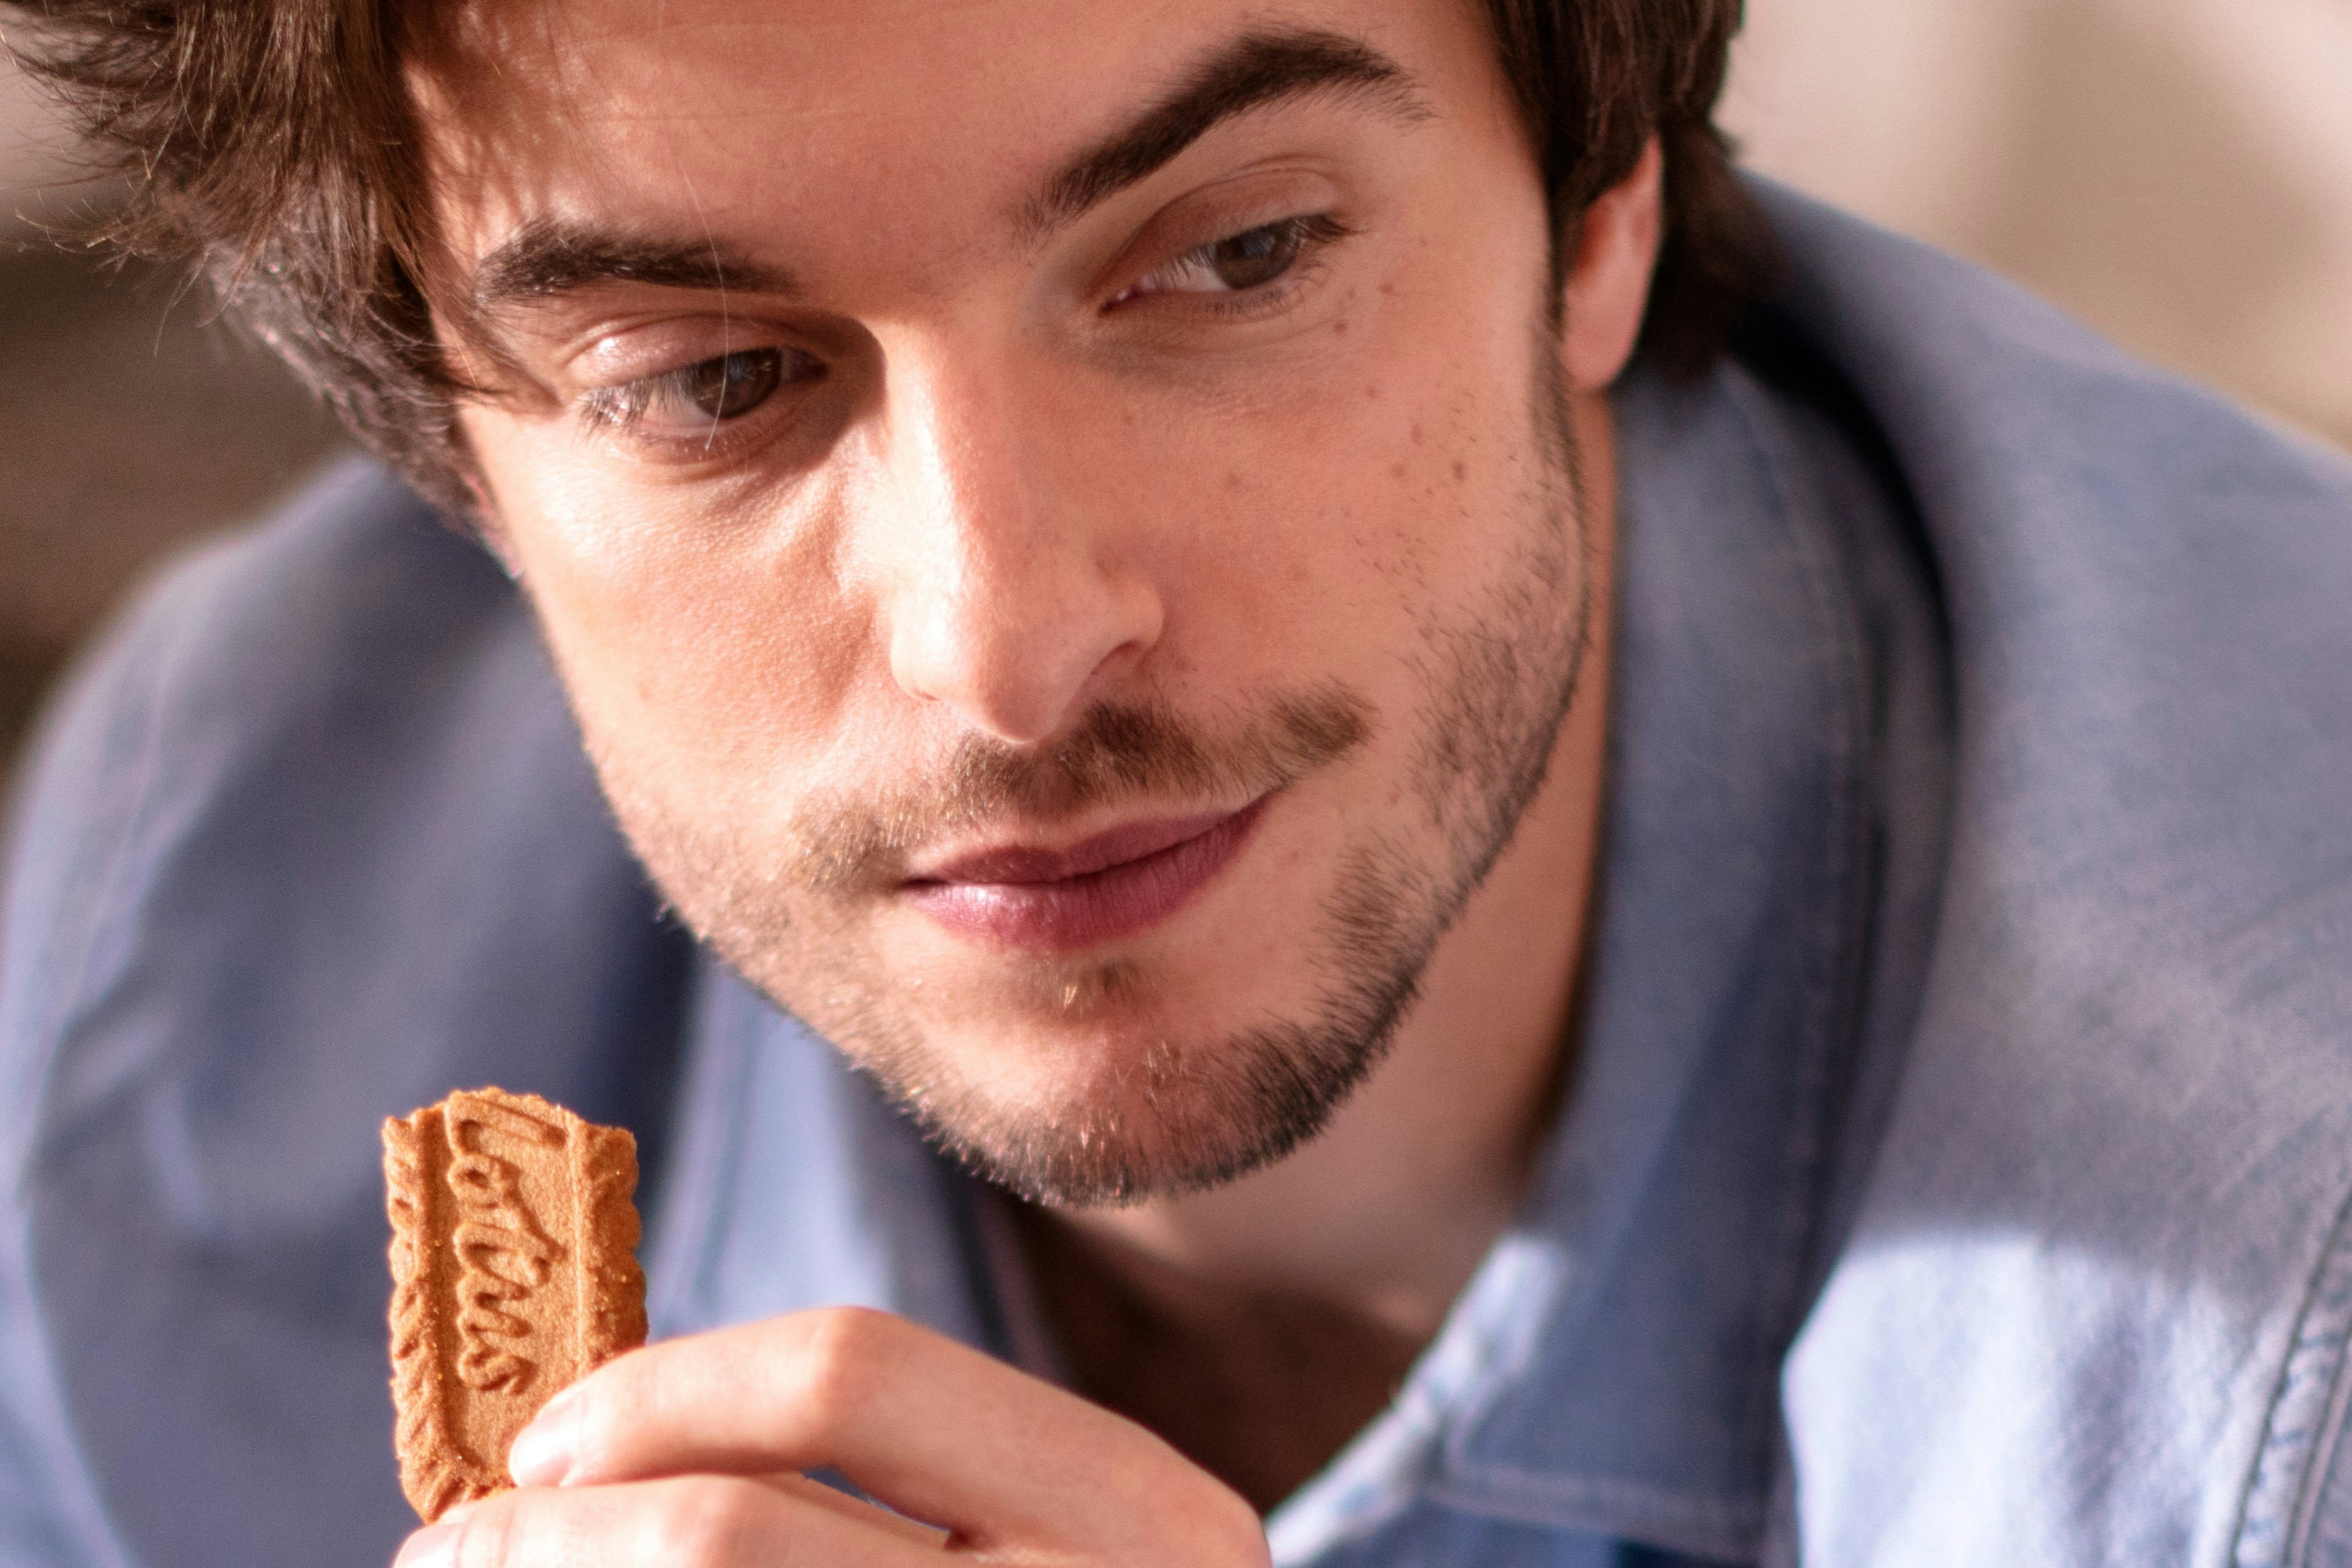 A man eating a Biscoff cookie